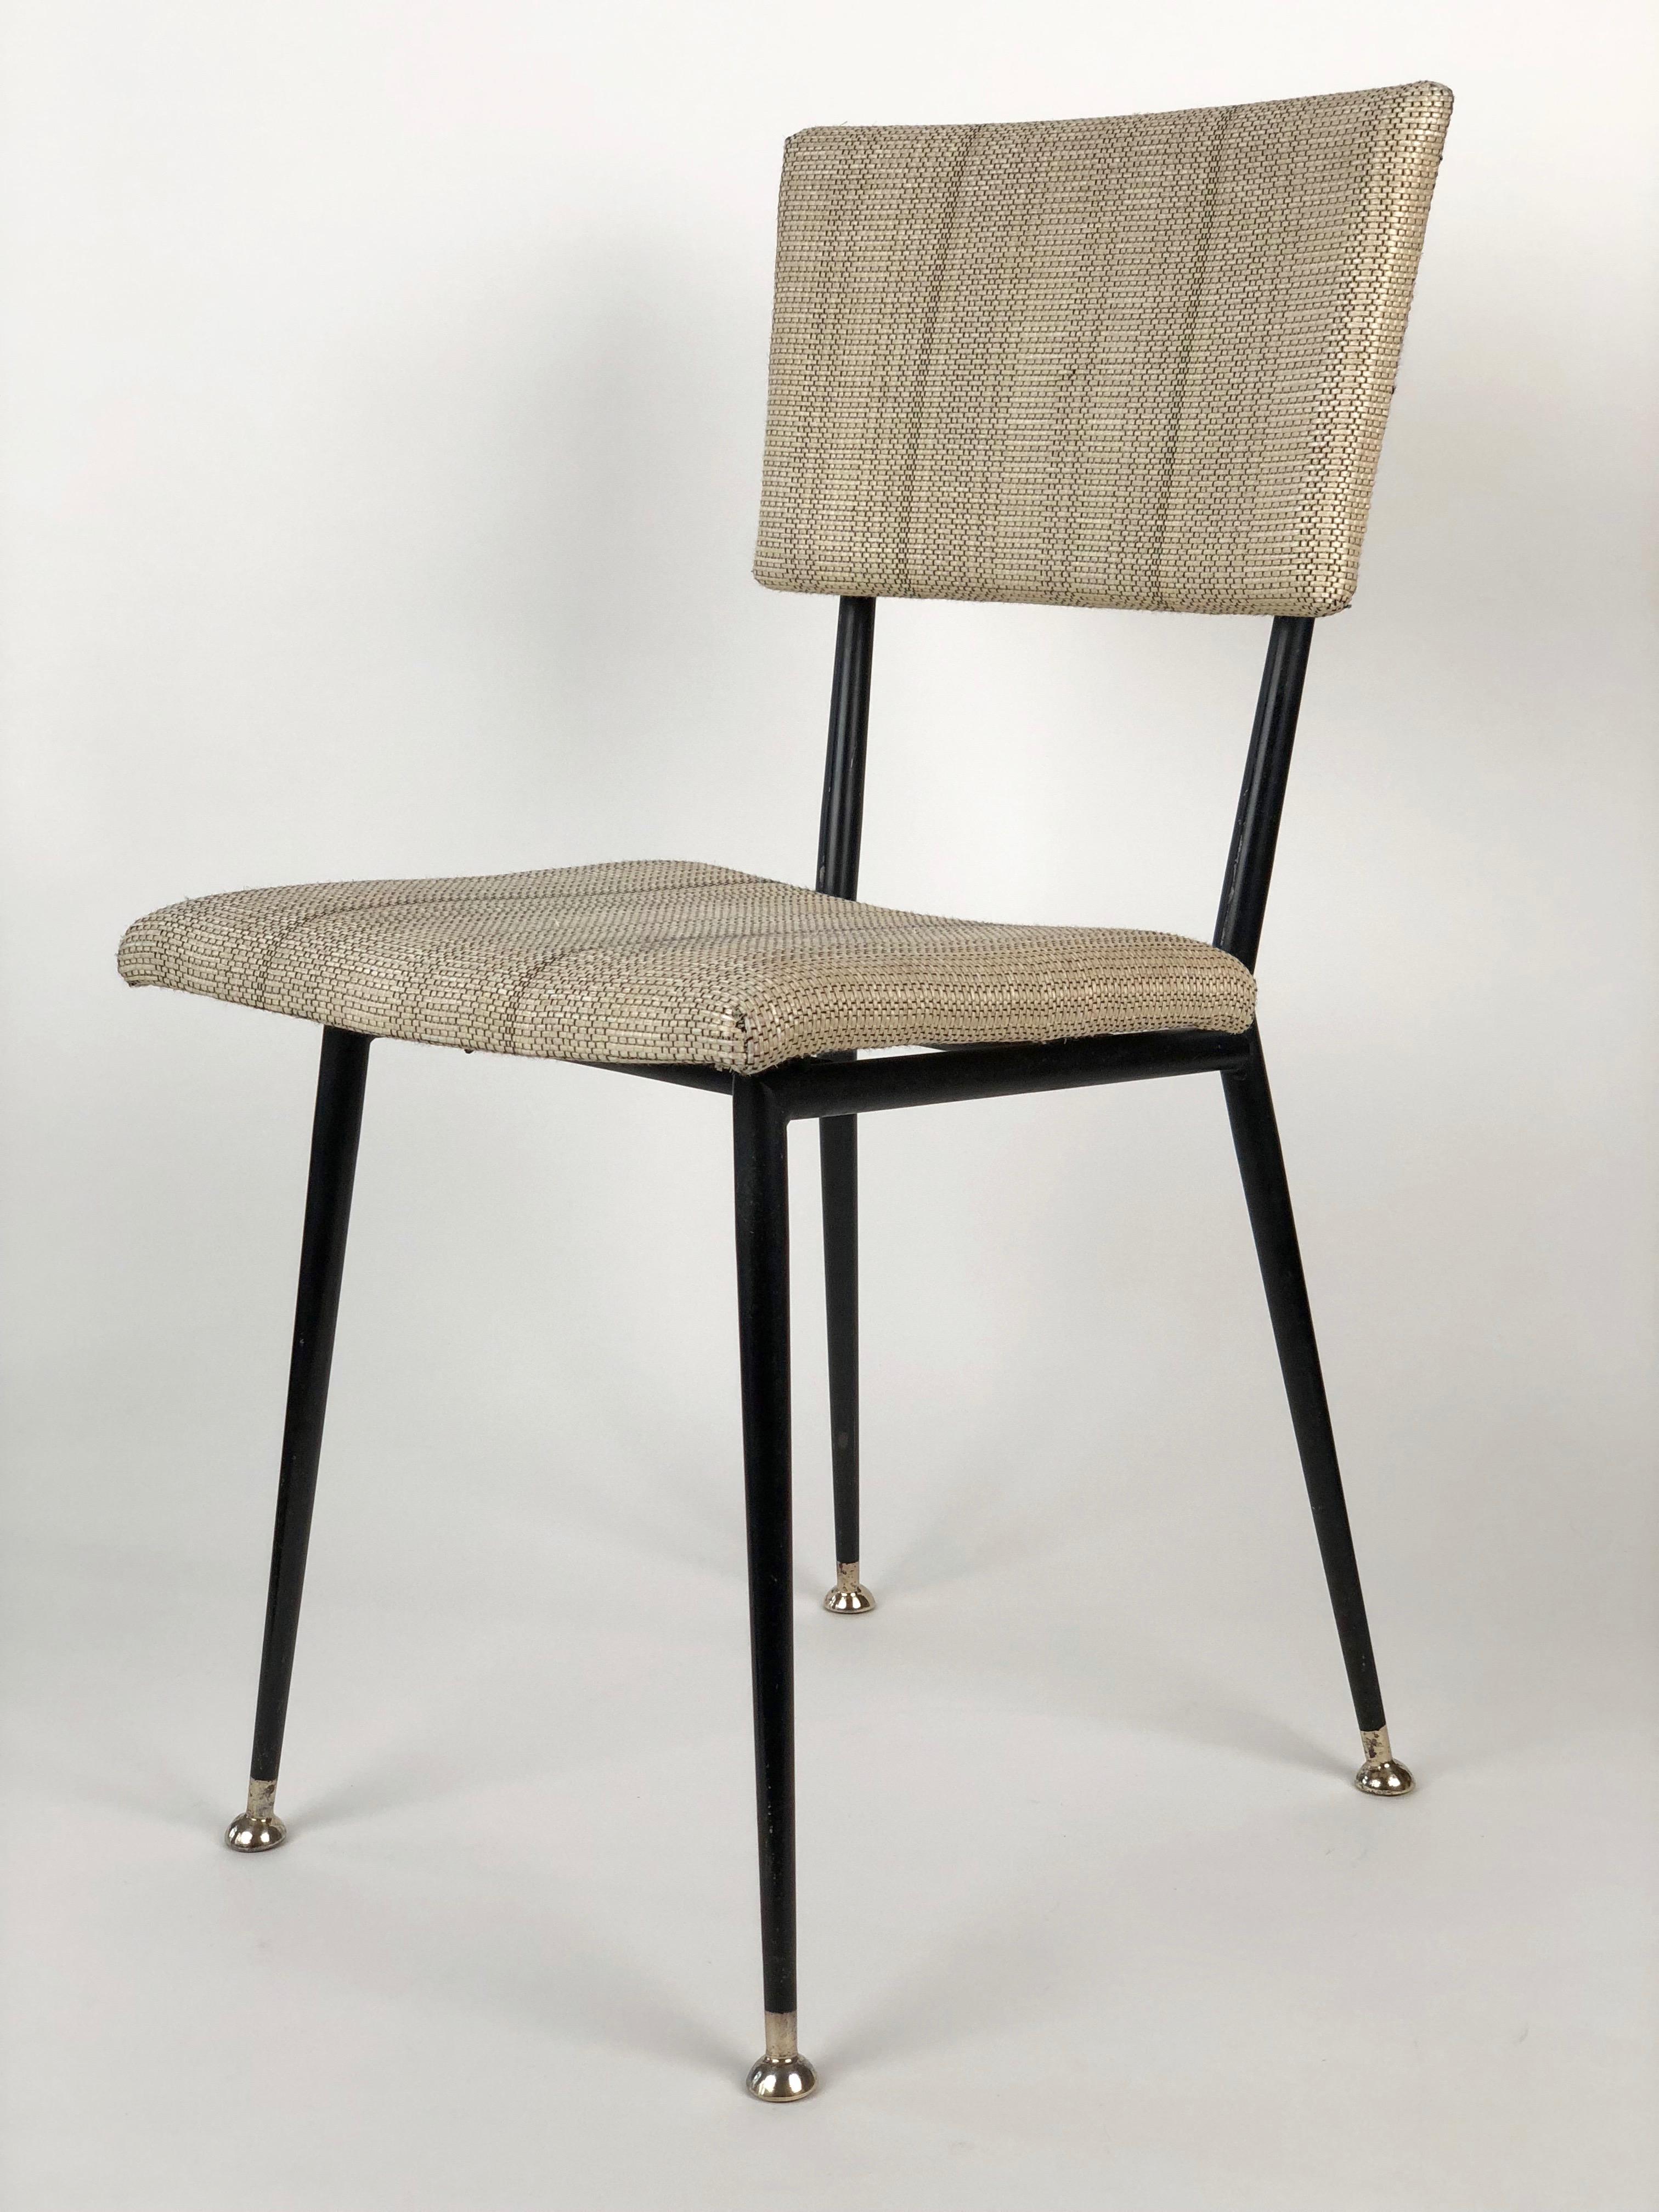 Midcentury chair from Sonnet, Austria is composed of metal tubing brazed together. The legs are tapered and end with brass feet.
Contrasting black and white upholstery matches well with the black frame.